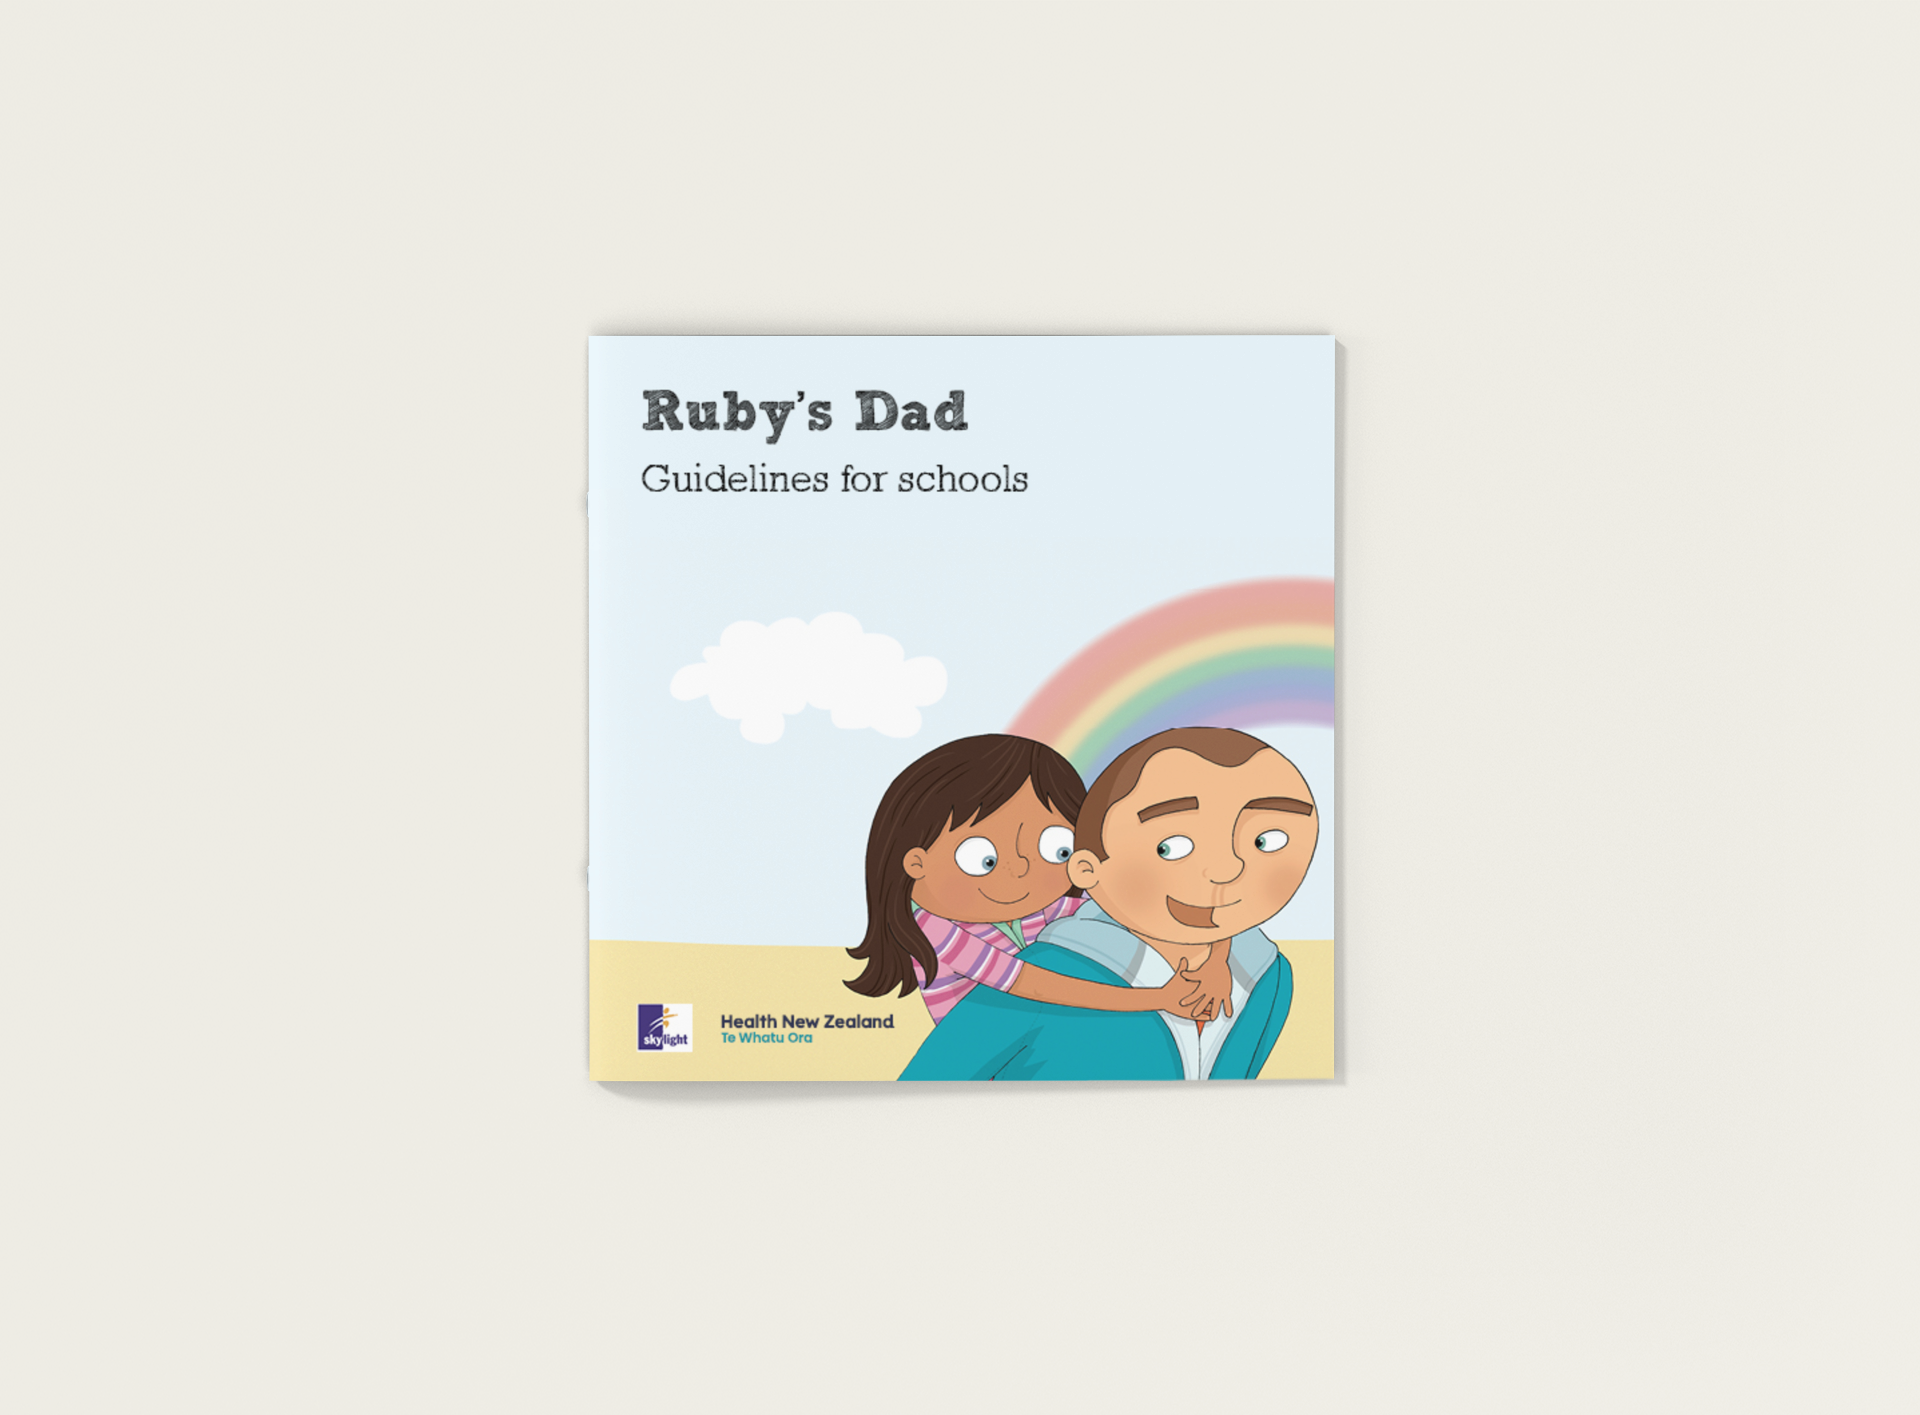 Ruby's Dad children's book with guidelines for schools